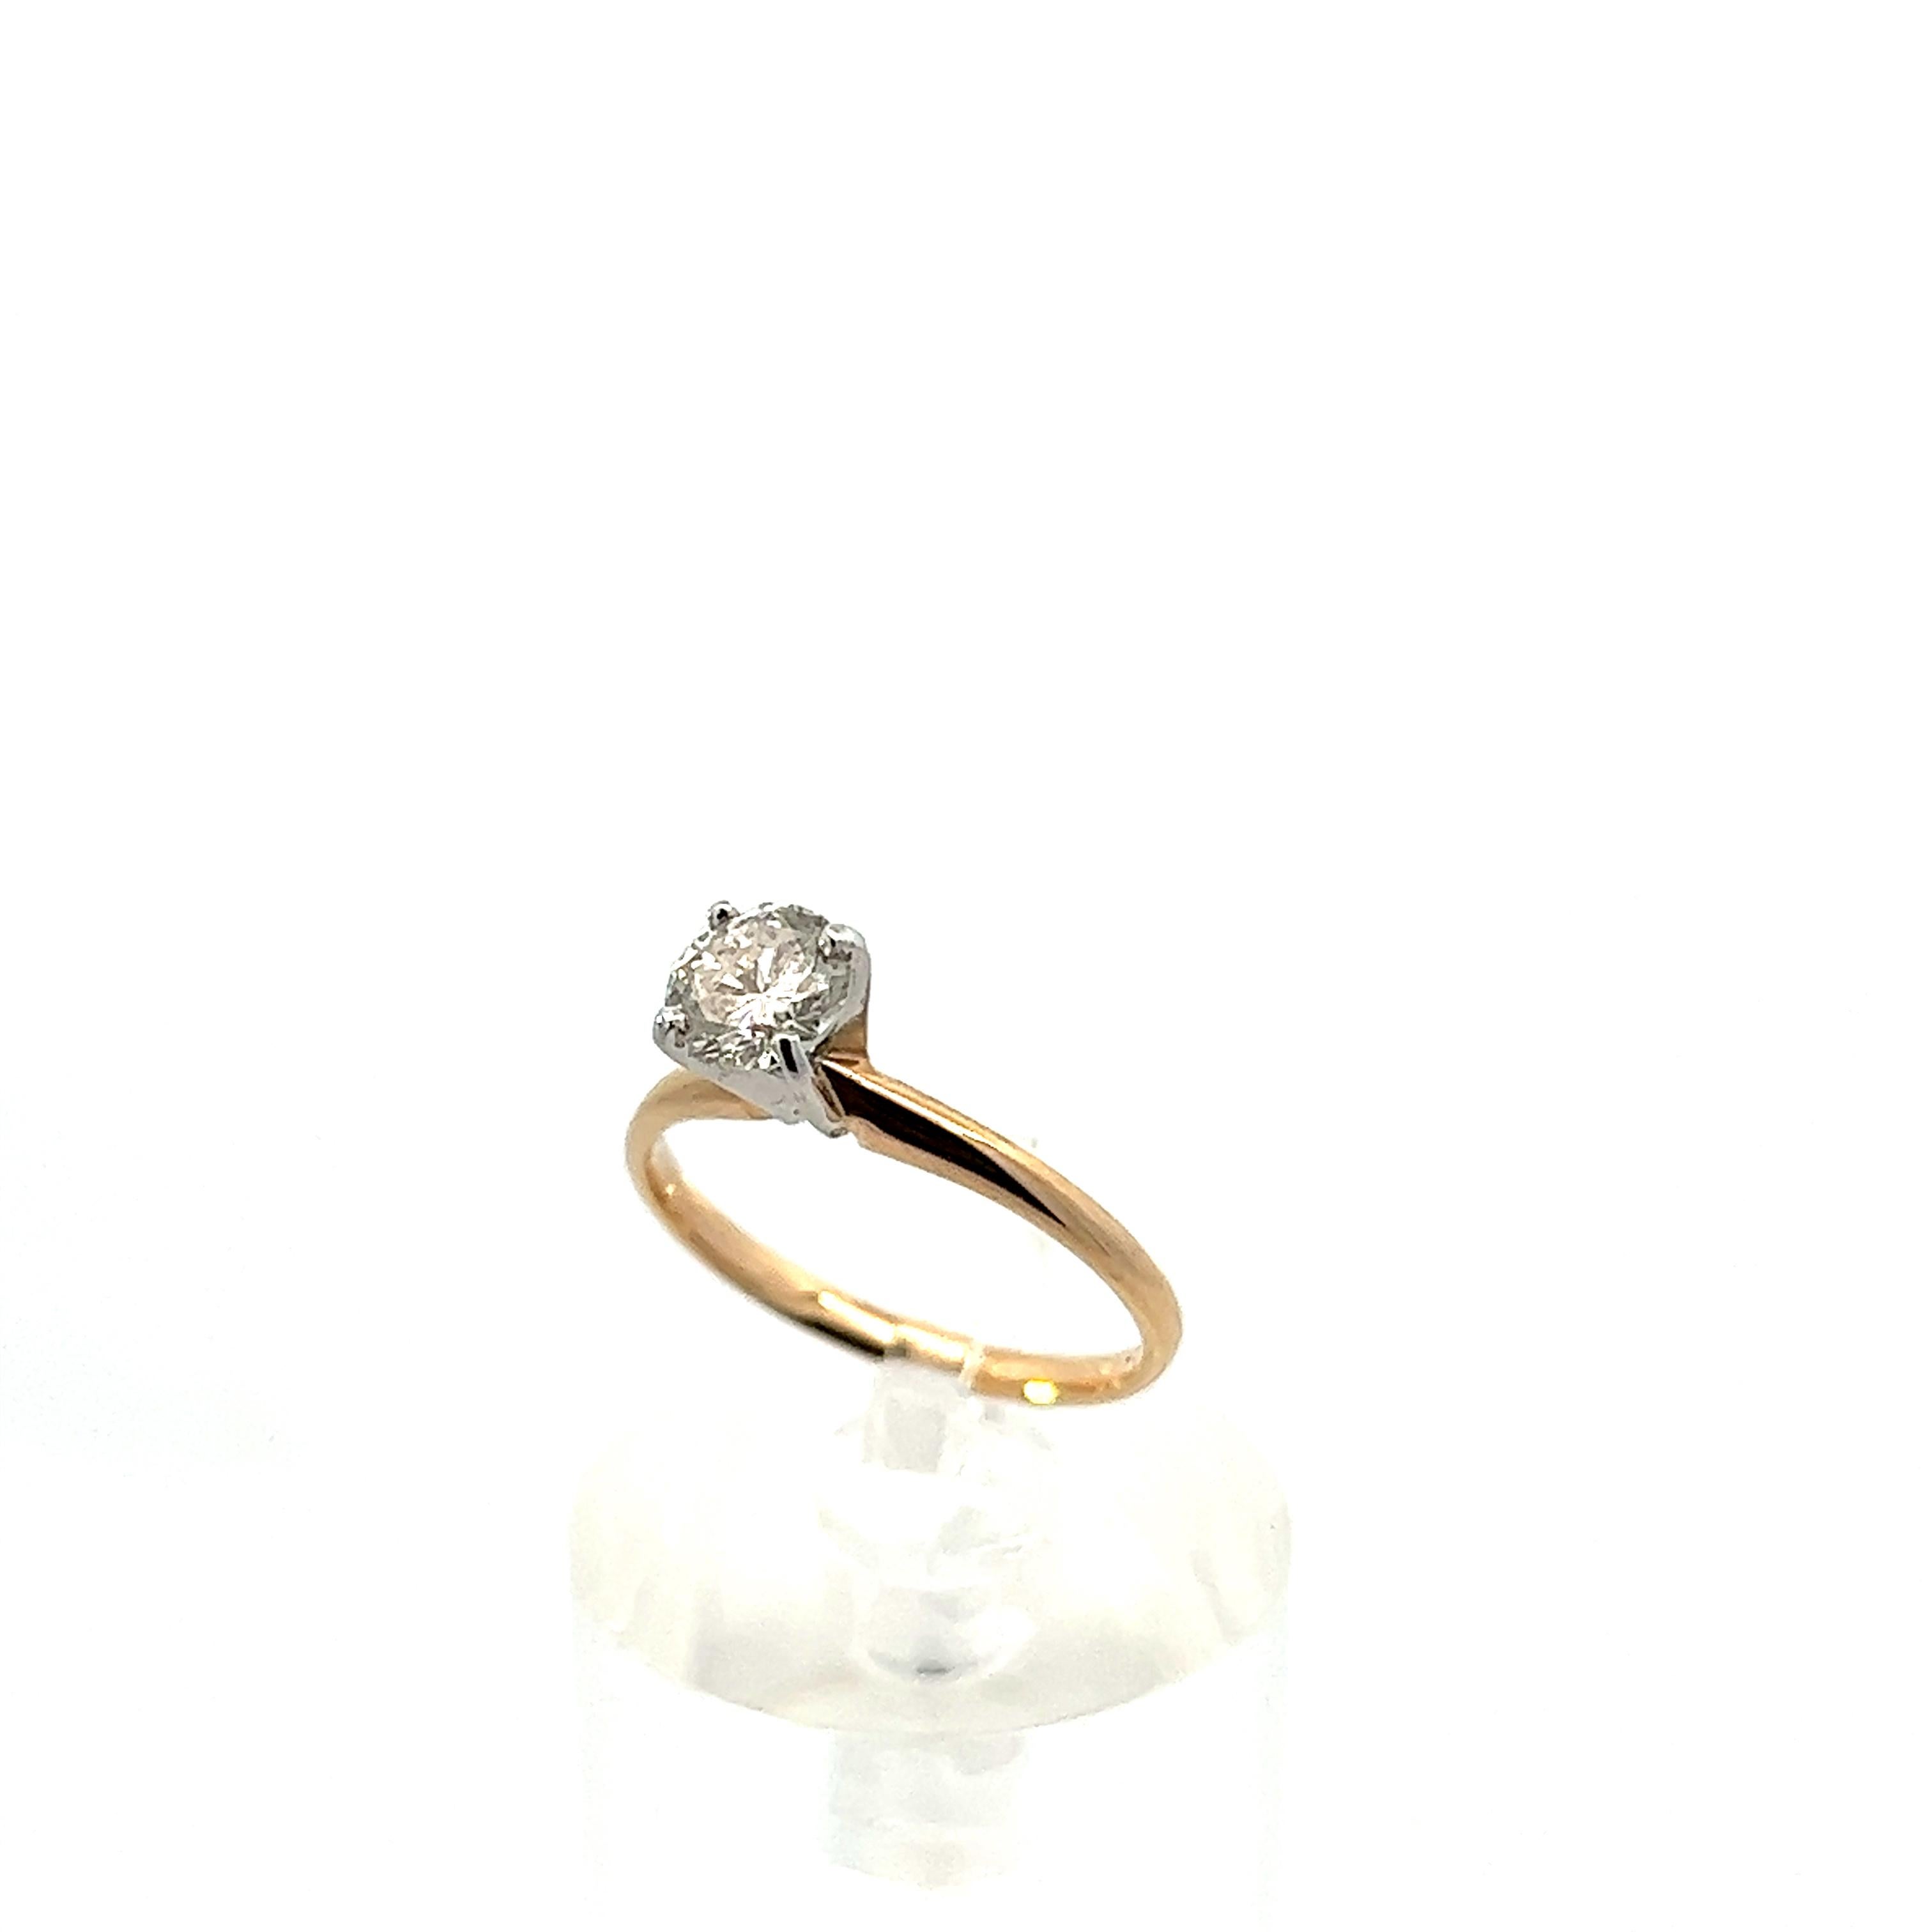 This contemporary 14k yellow and white gold diamond solitaire ring is the embodiment of sophistication and beauty. The band is made in gorgeous 14k yellow gold, while the solitaire diamond is set in a 14k white gold, to further enhance the sparkle